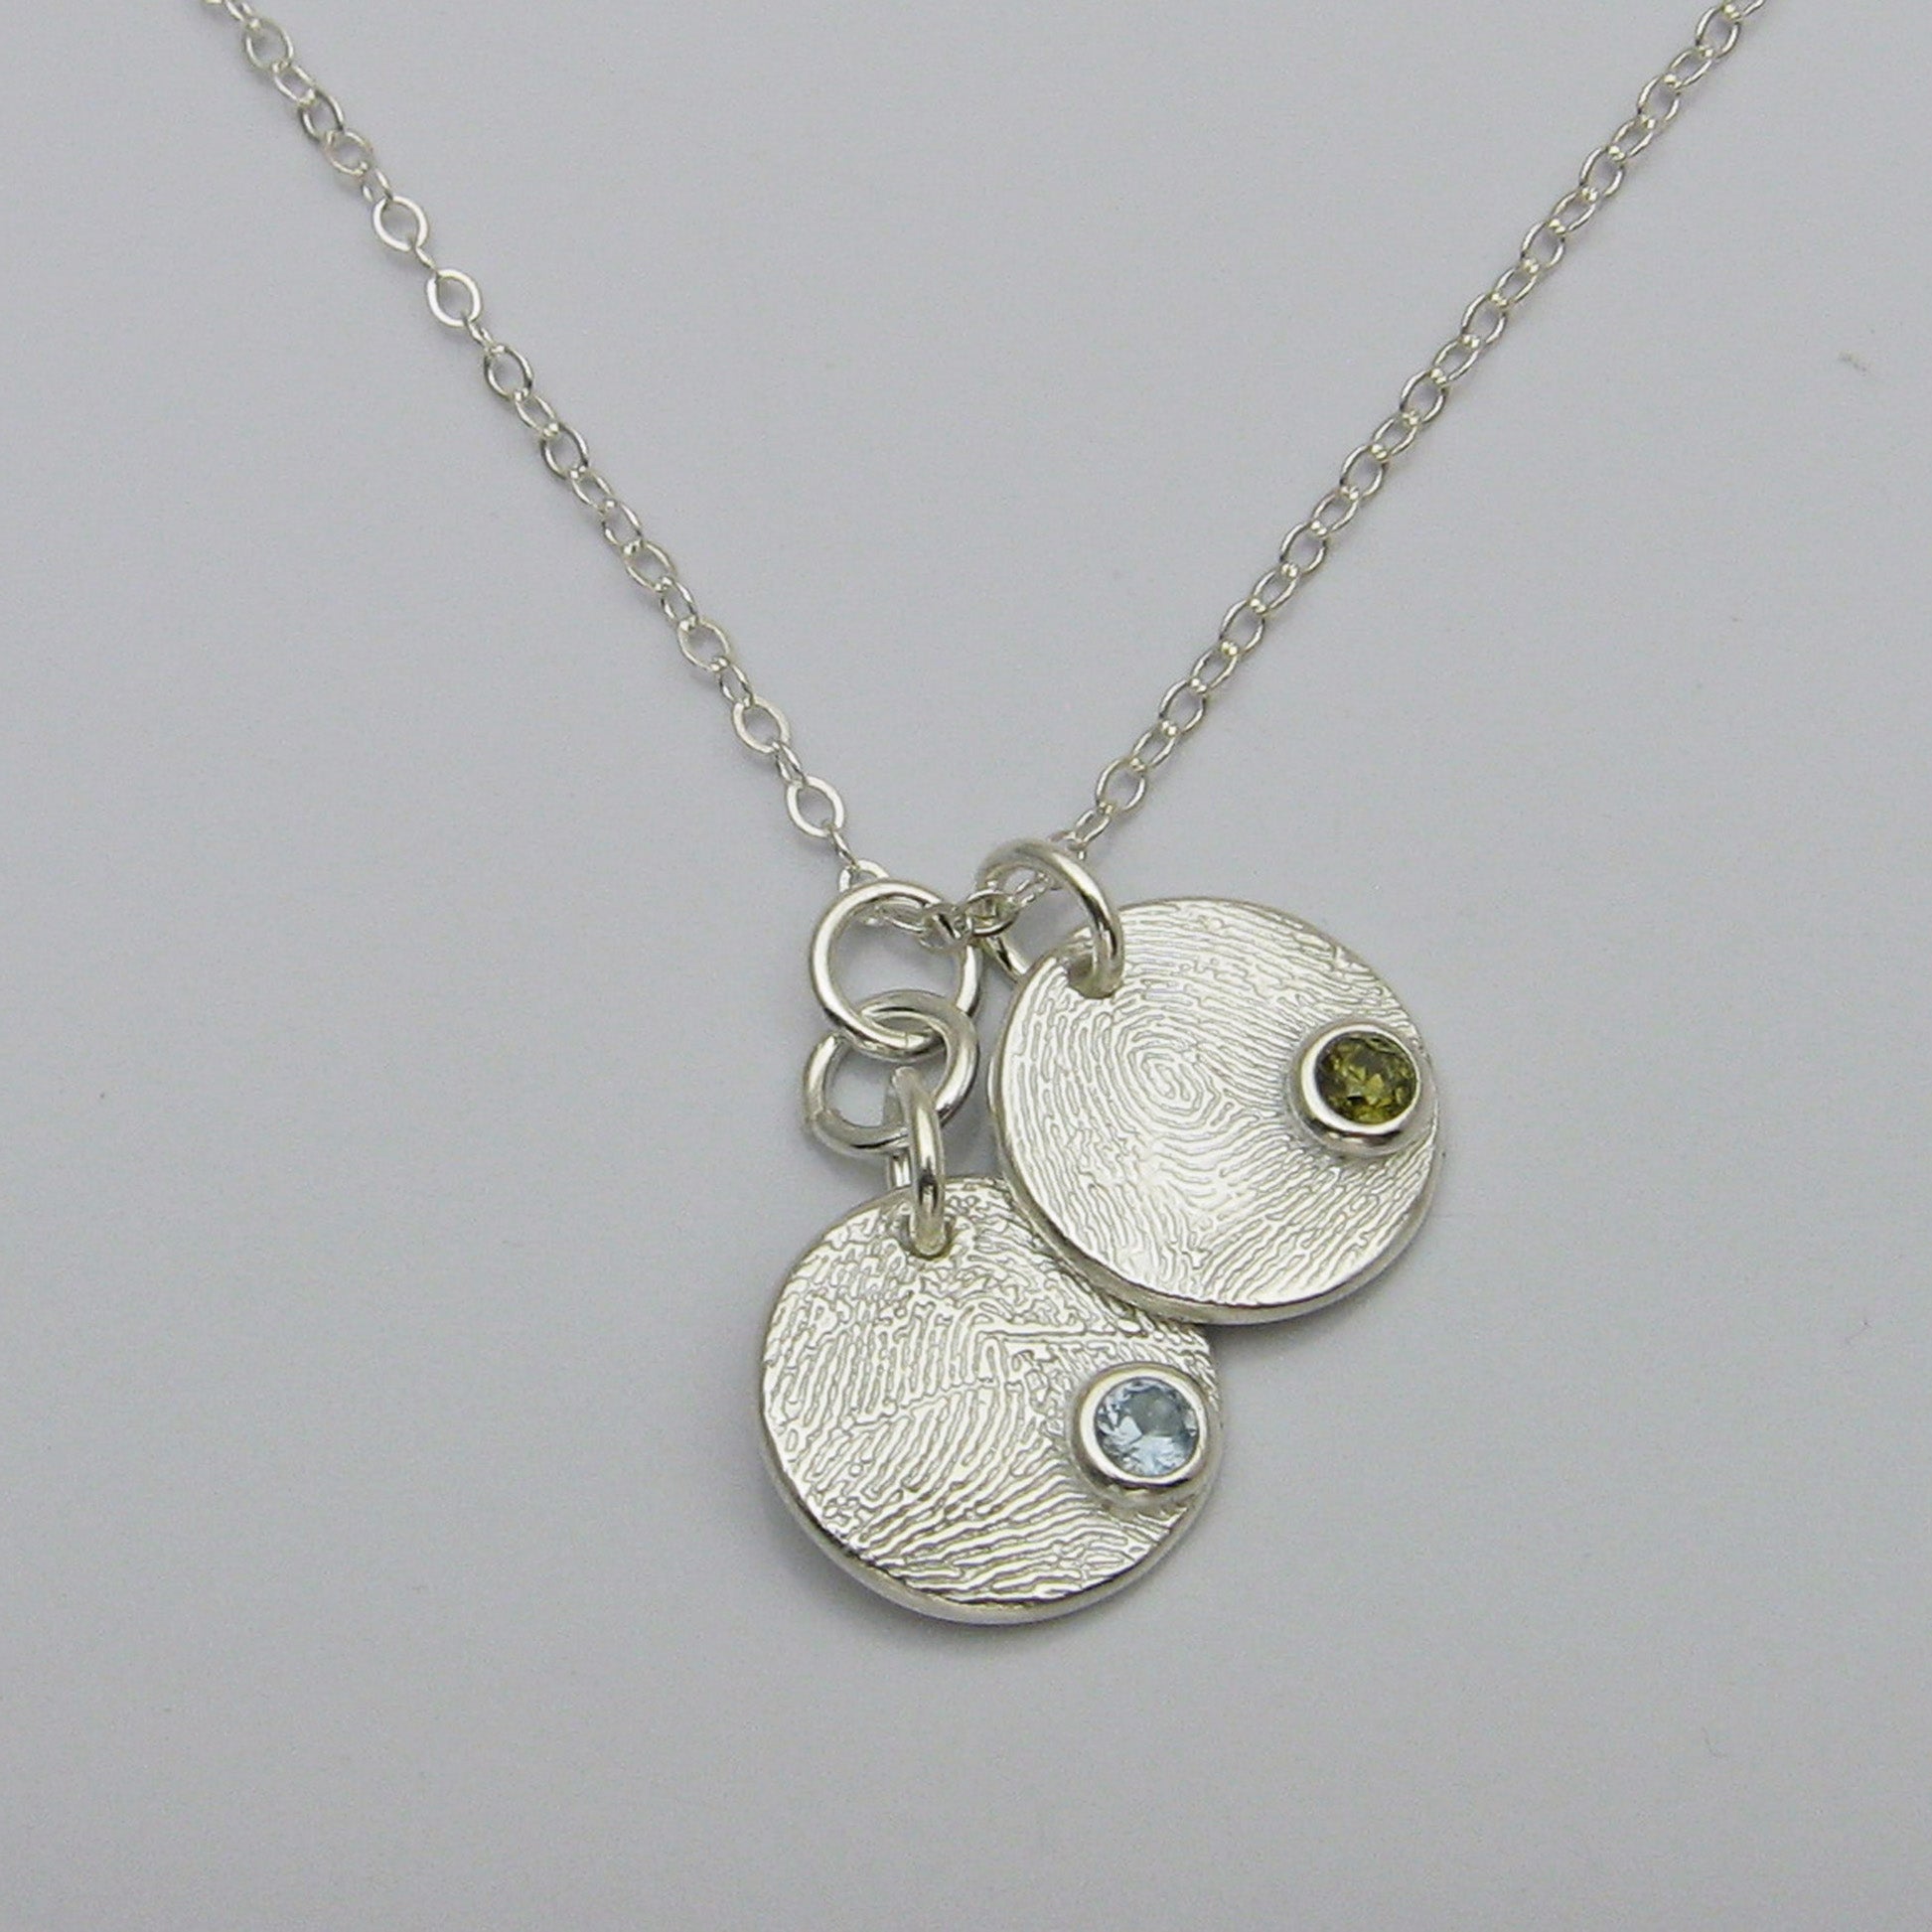 Circle Fingerprint with Birthstone Charm Necklace wtih 2 charms